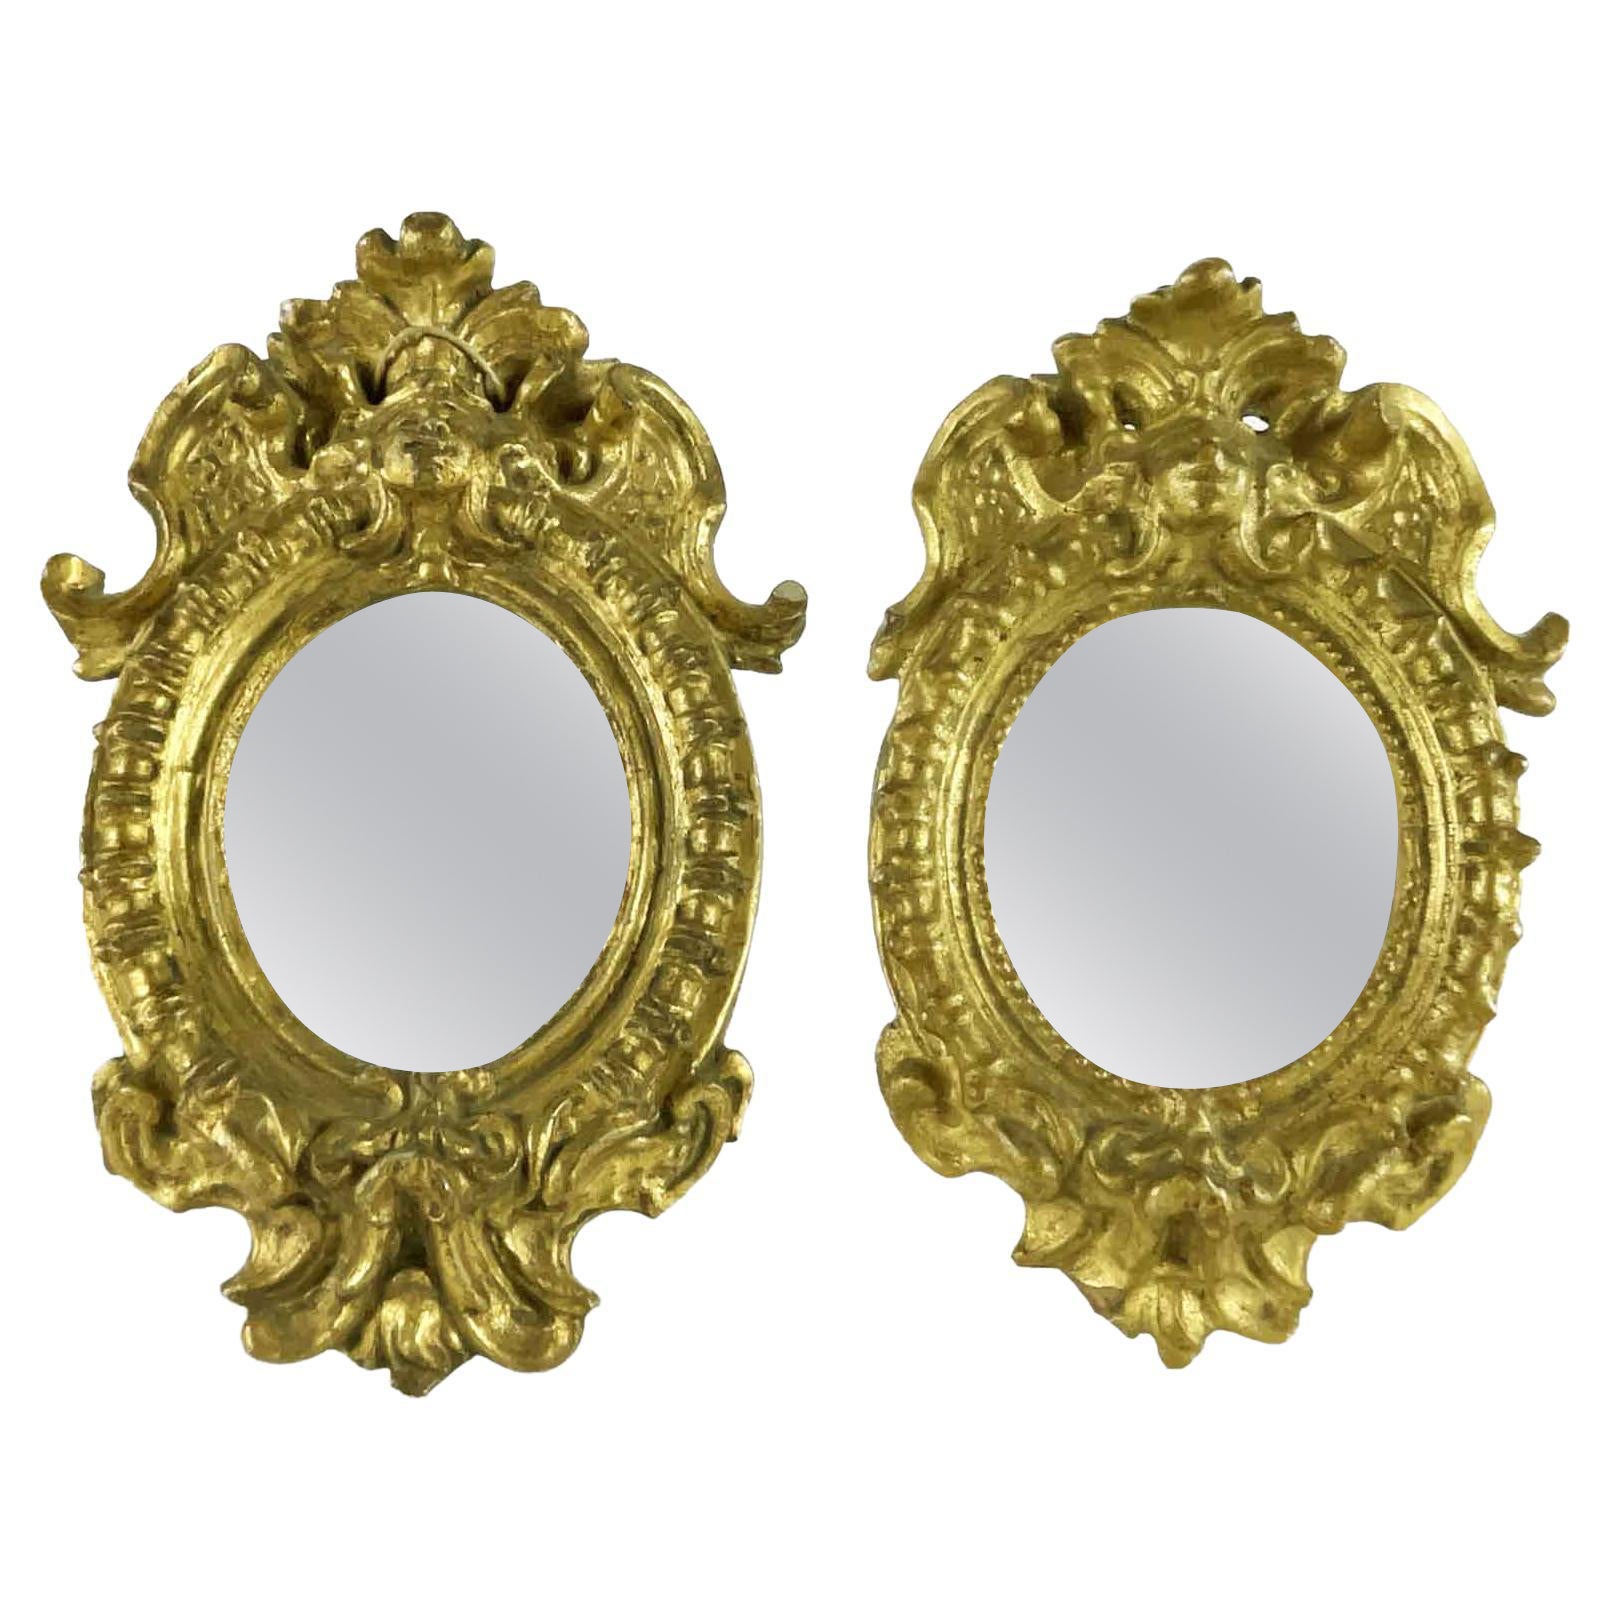 18th Century Louis XIV Italian Gilt Frames Pair of Oval Small Frames From Rome